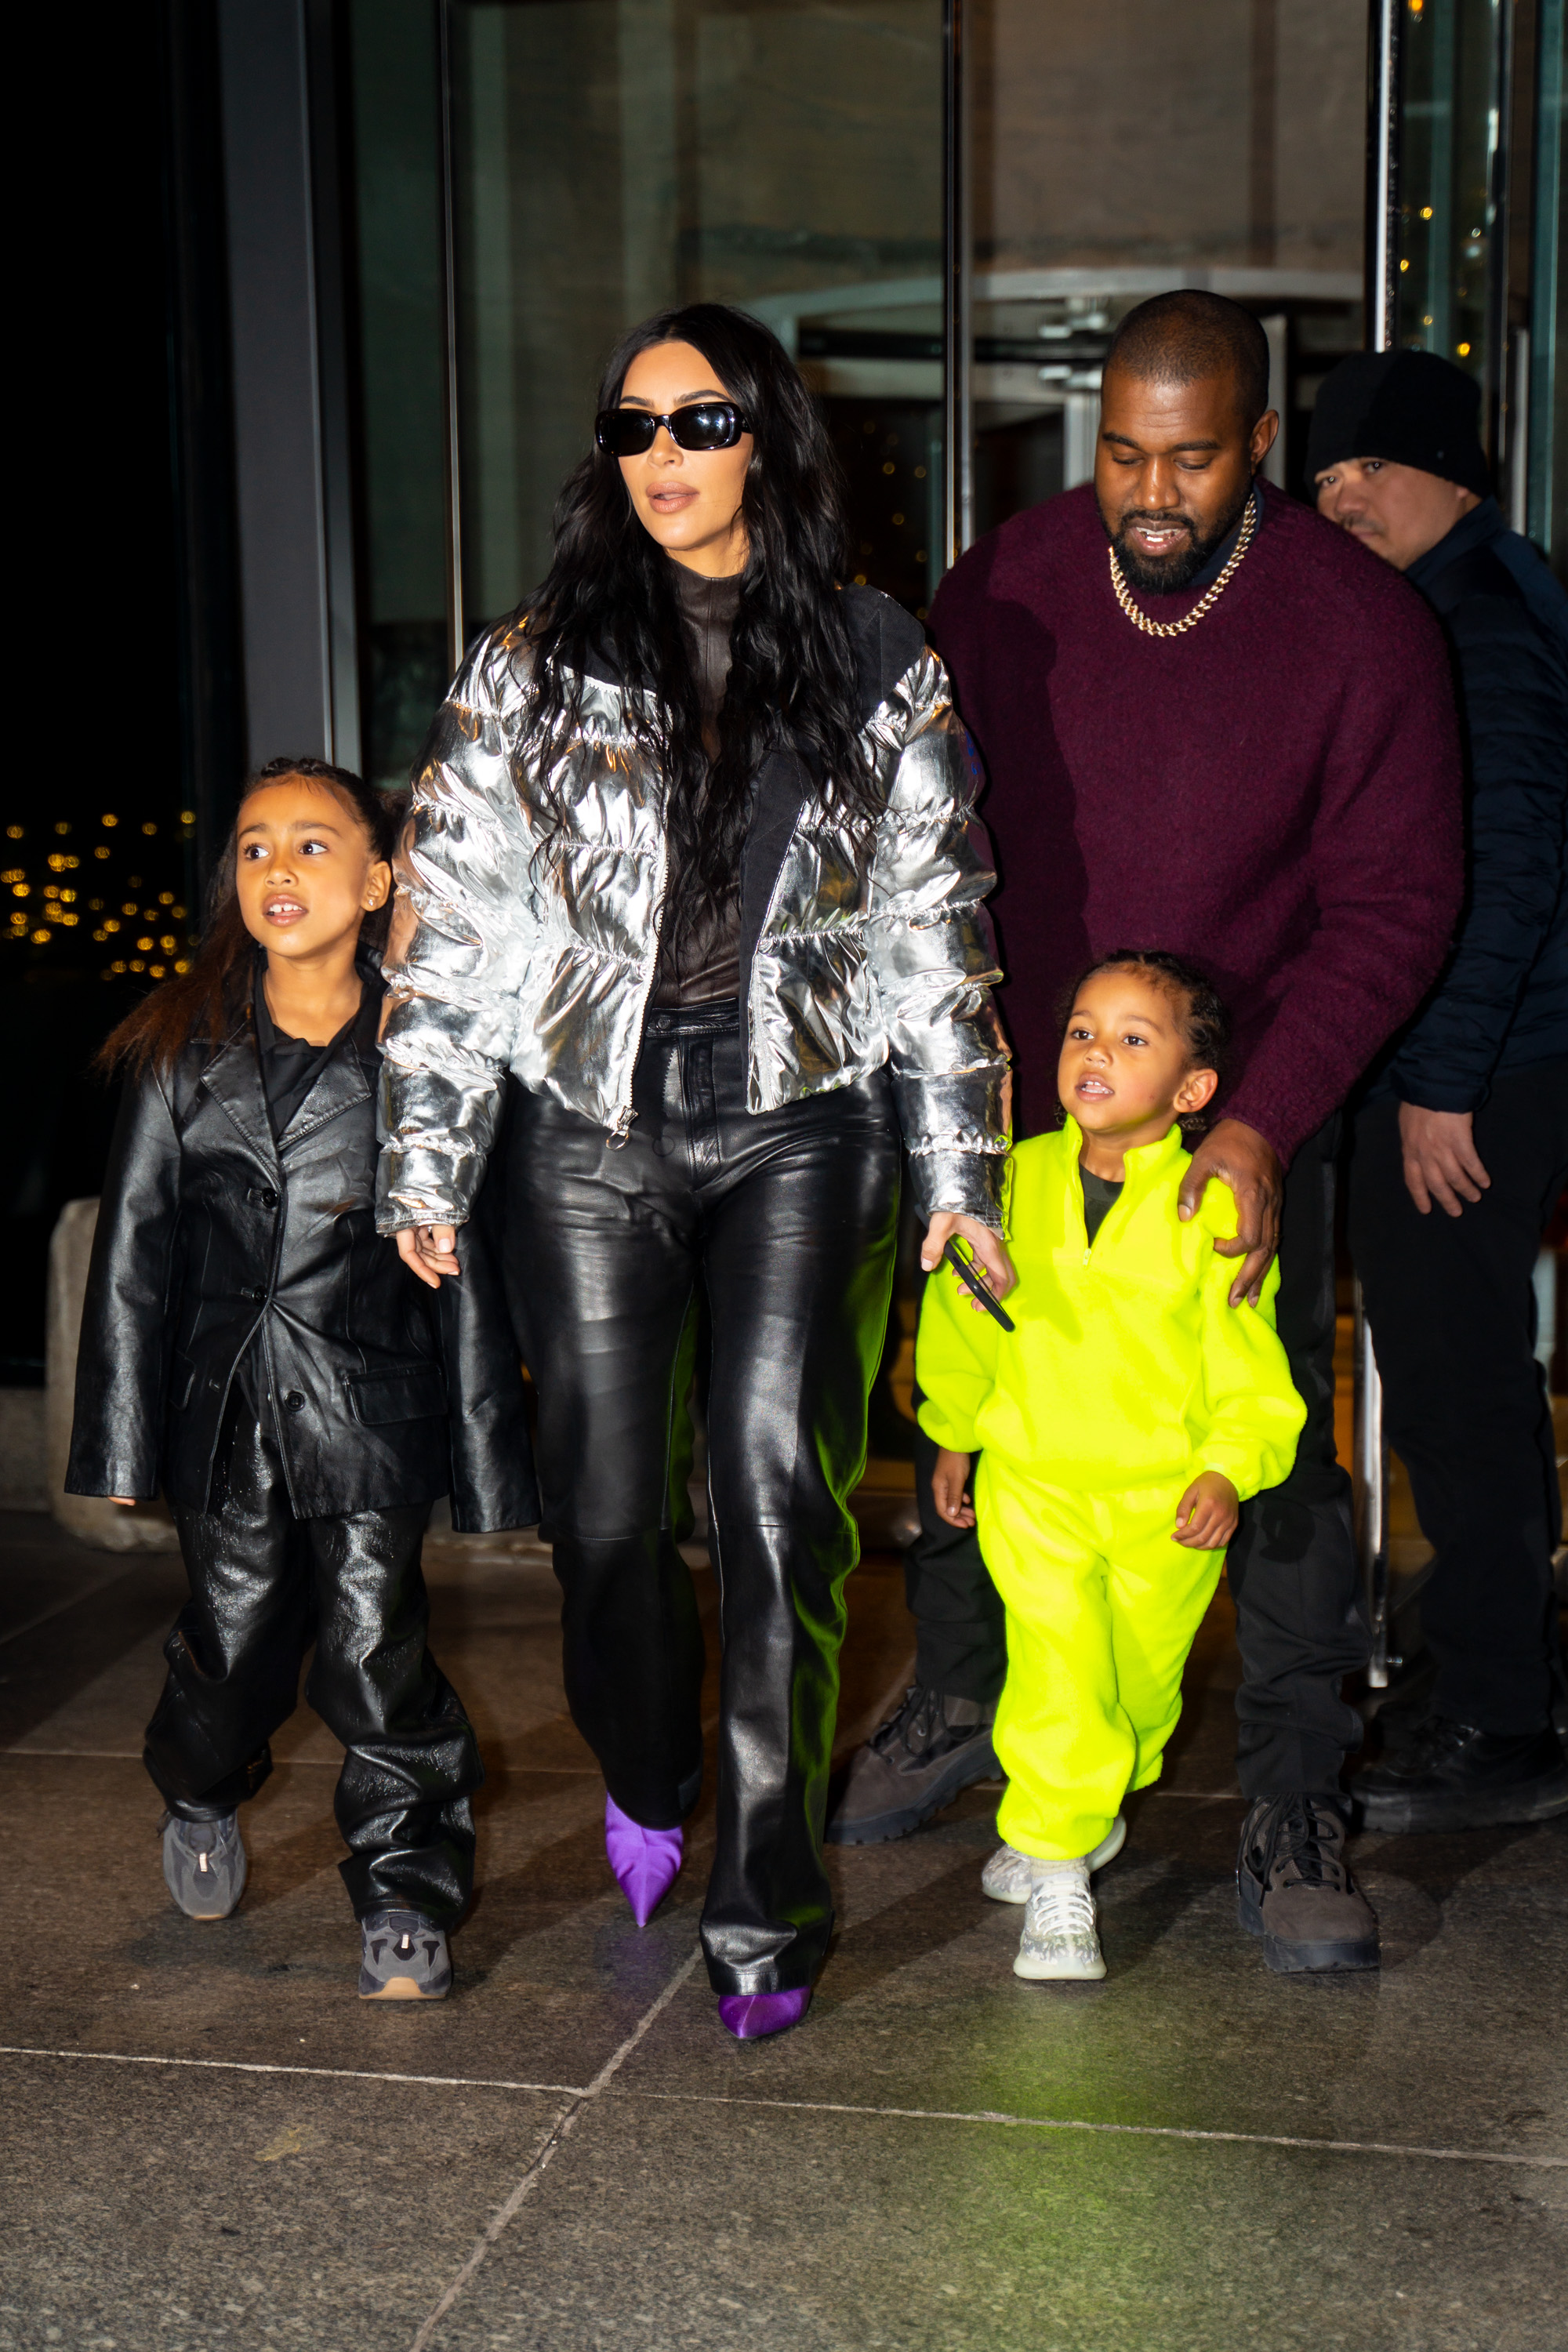 North West, Kim Kardashian, Kanye West, and Saint West are seen in New York City on December 21, 2019 | Source: Getty Images